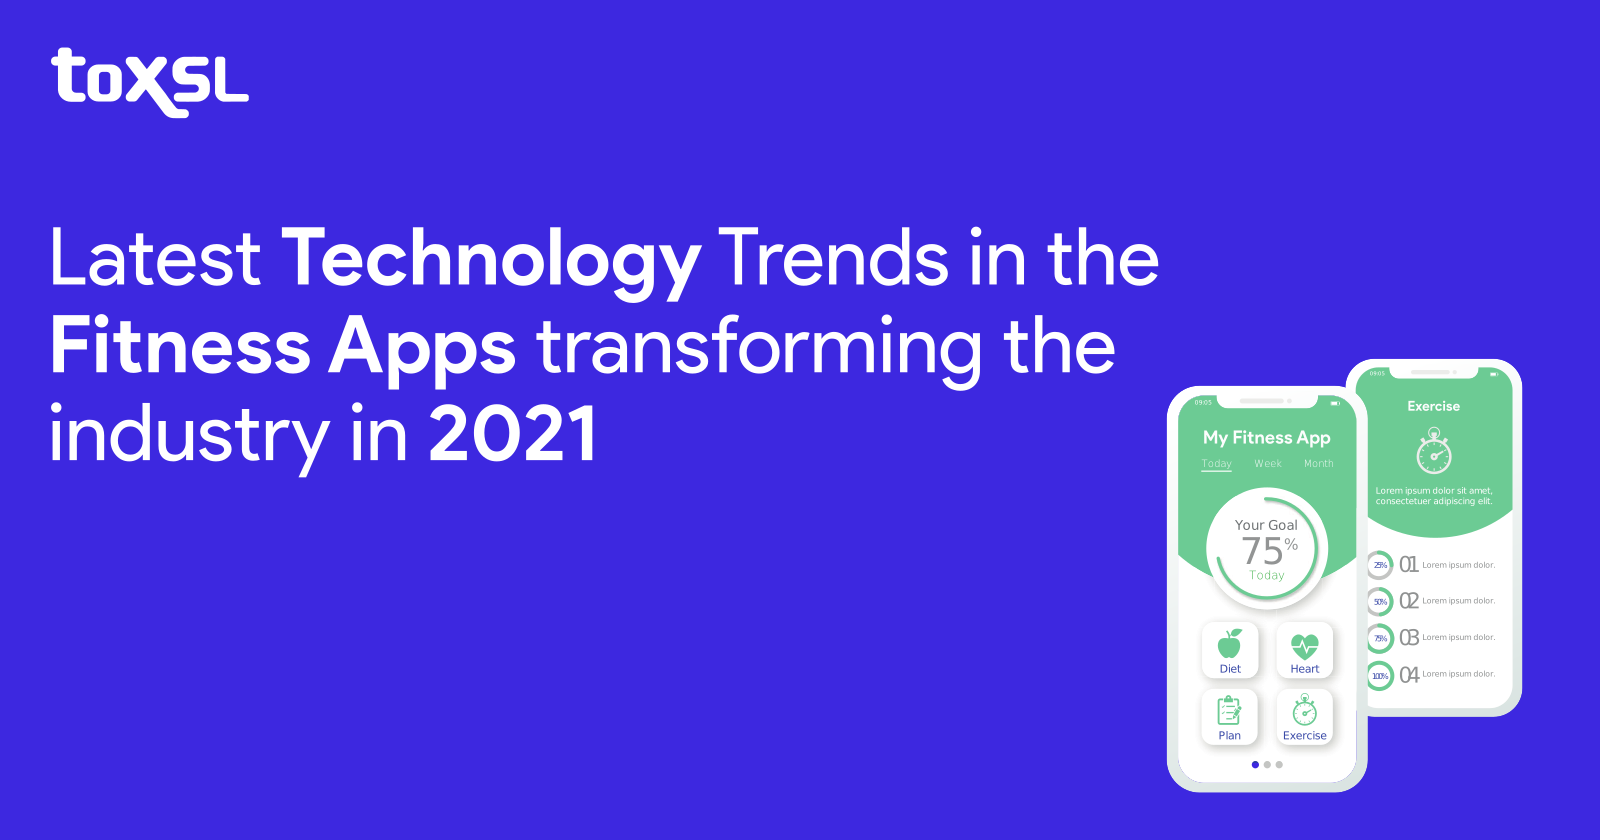 Latest Technology Trends in the Fitness Apps Transforming the Industry in 2021